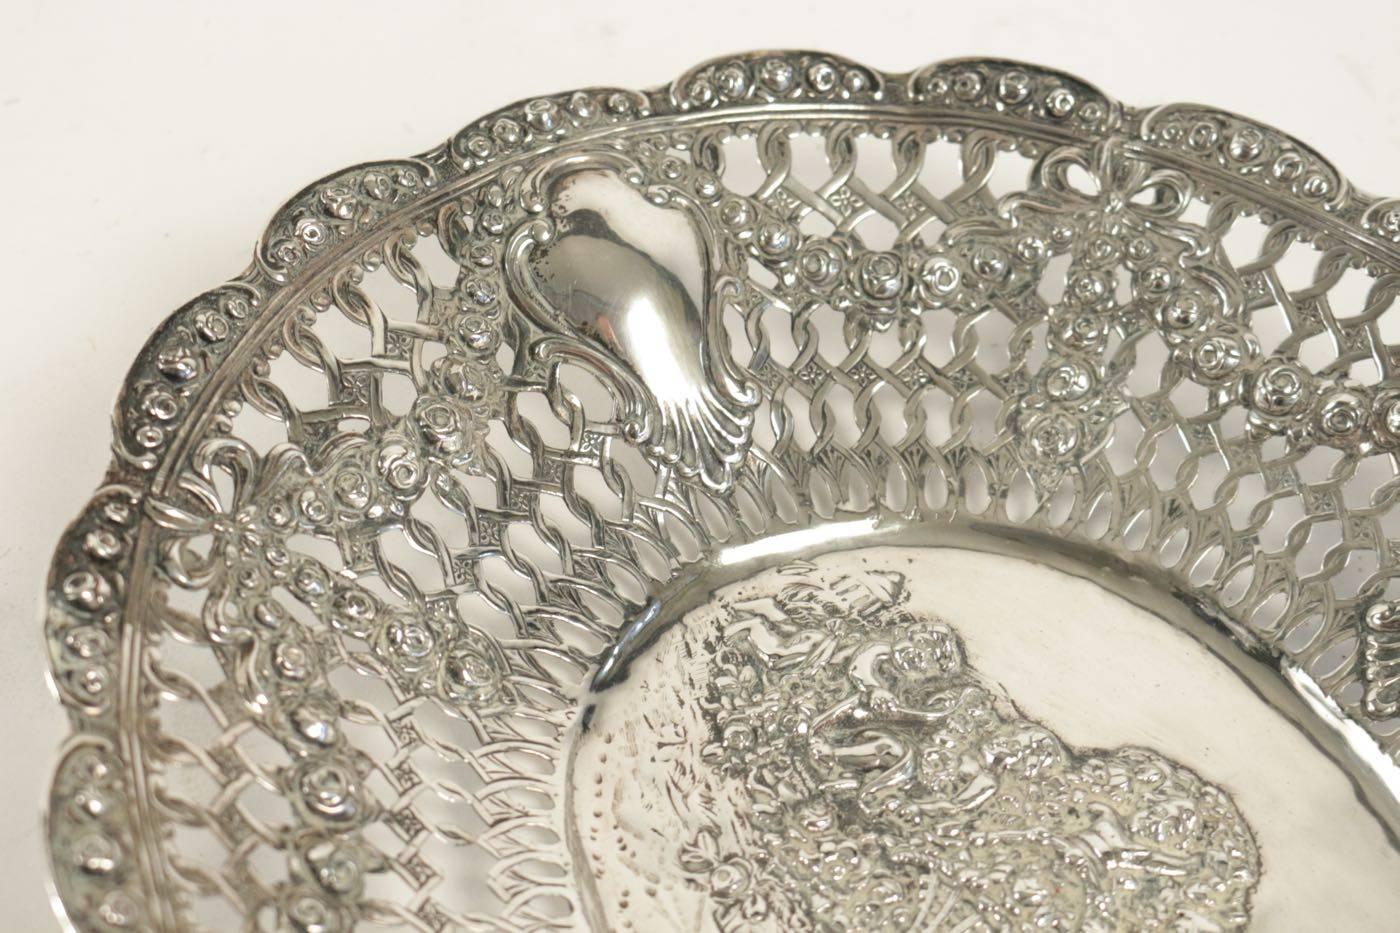 Austrian 19th Century Sterling Silver Pierced Dish with Cherubs and Garlands of Flowers